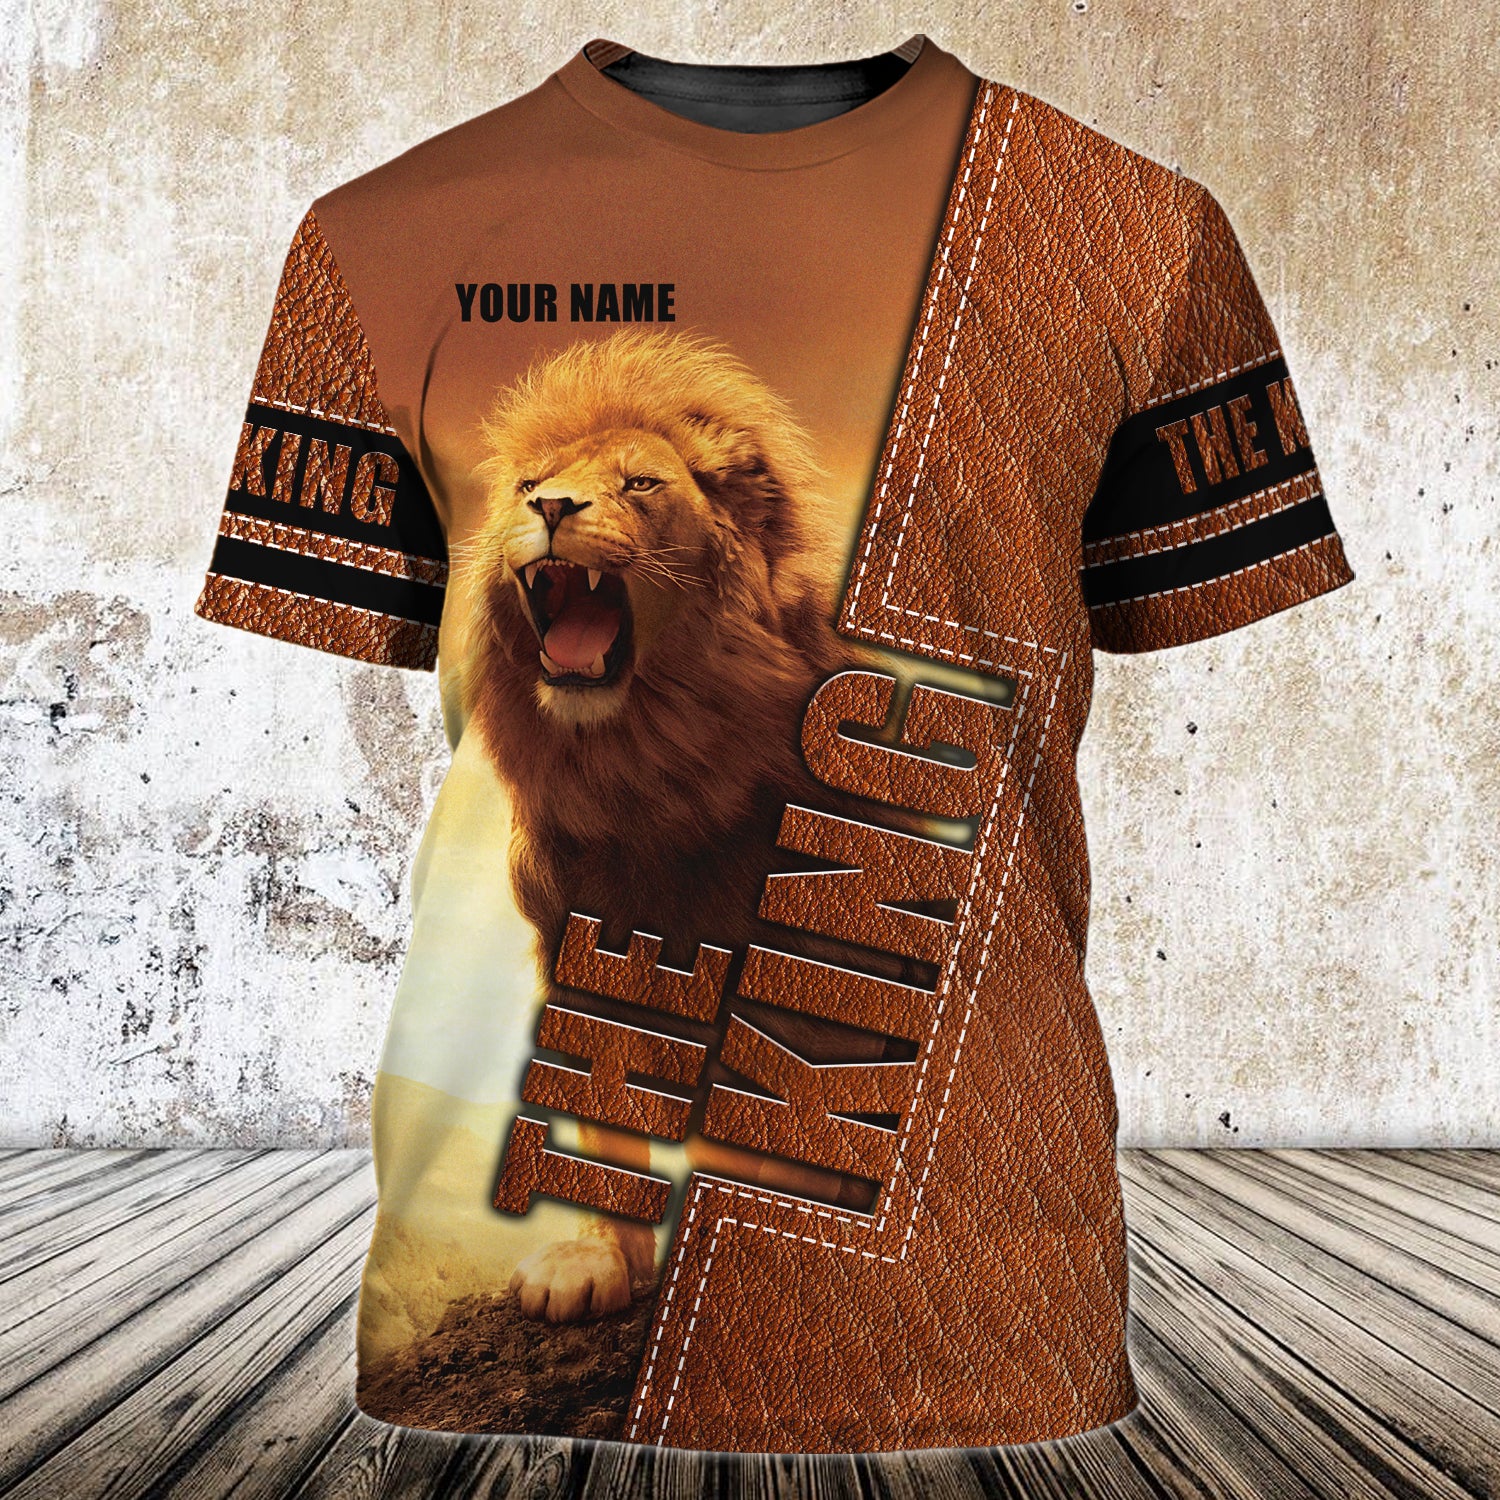 Long live the king - Personalized Name 3D Tshirt - Lst149